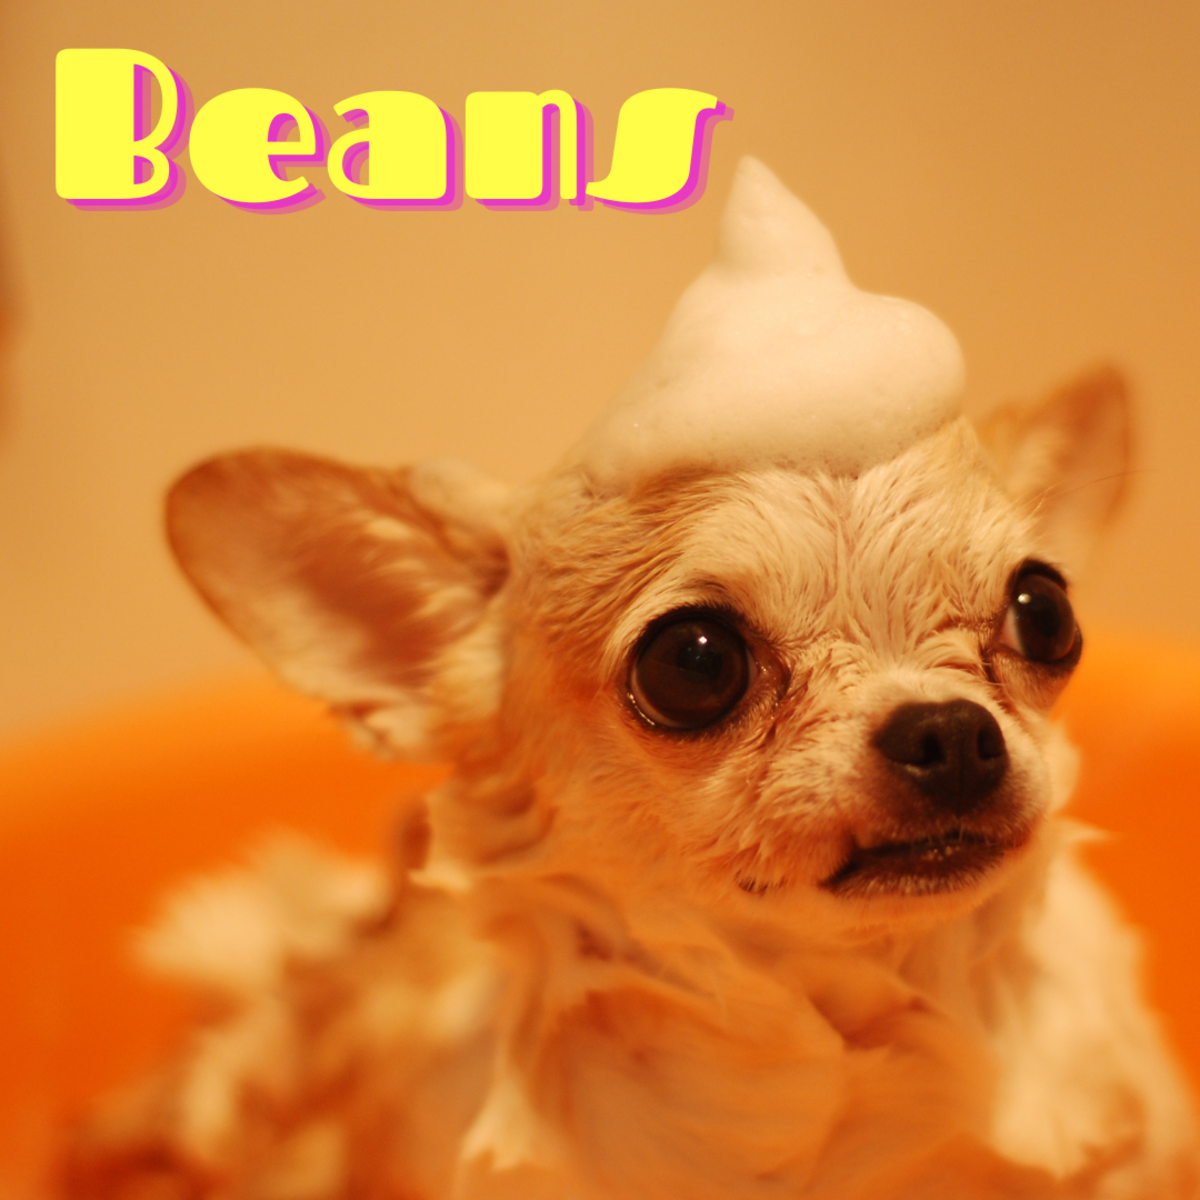 Does the name "Beans" fit your dog?